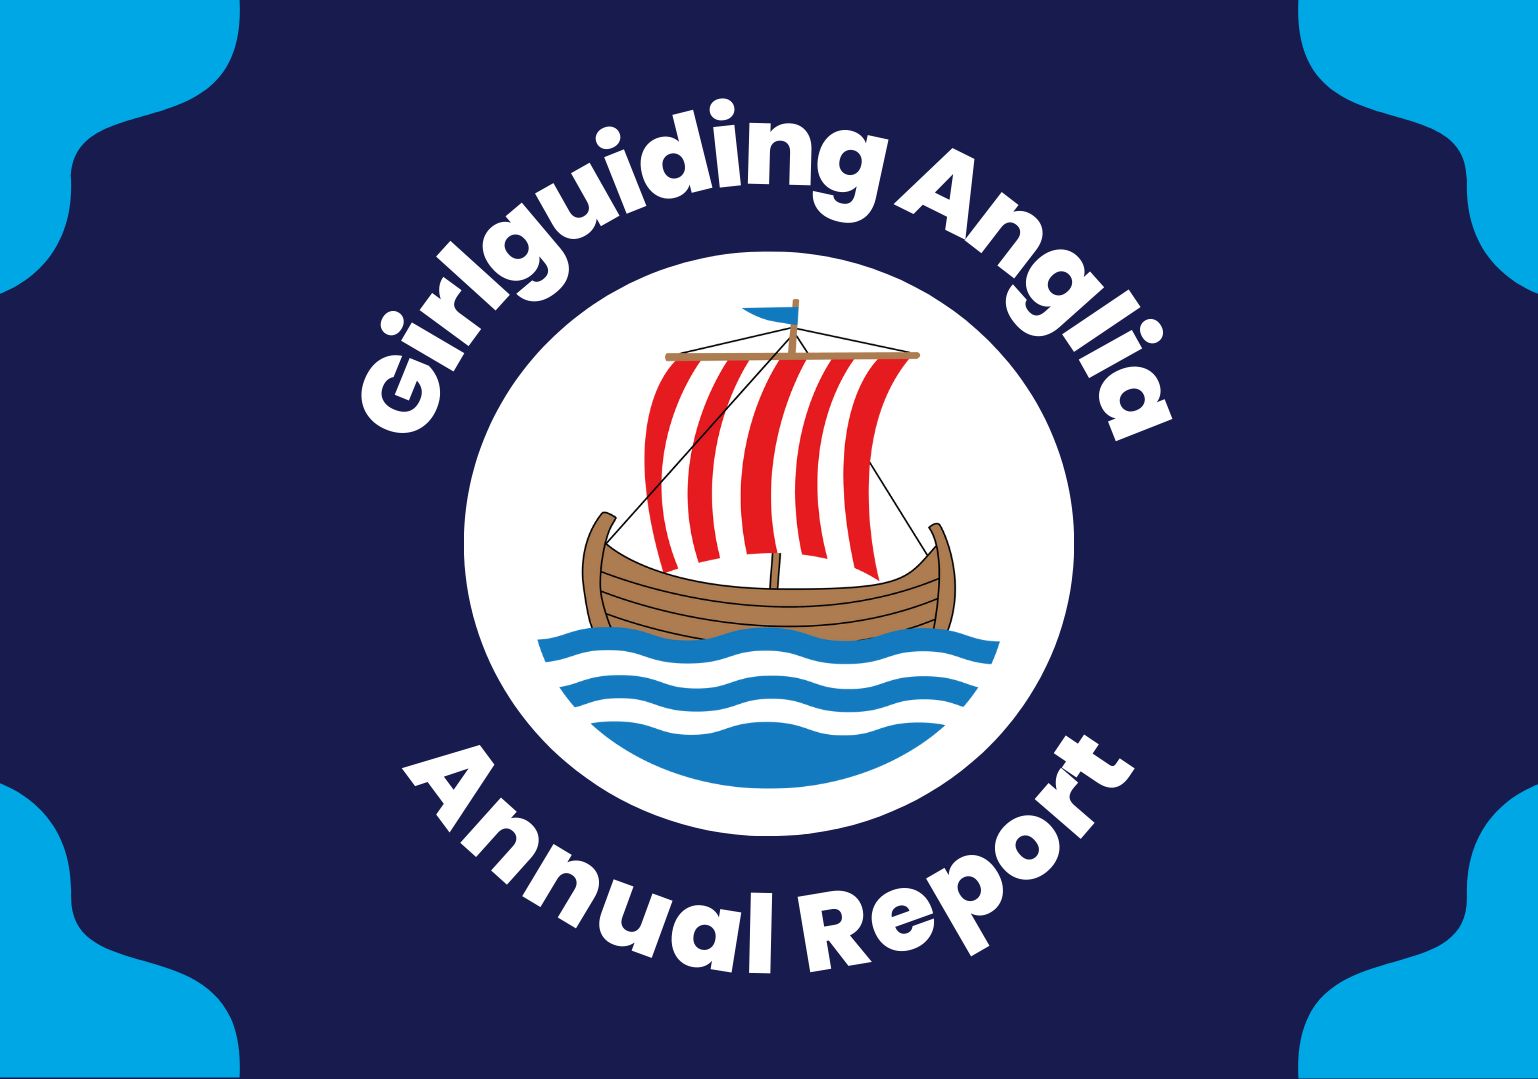 image relating to Annual Reports